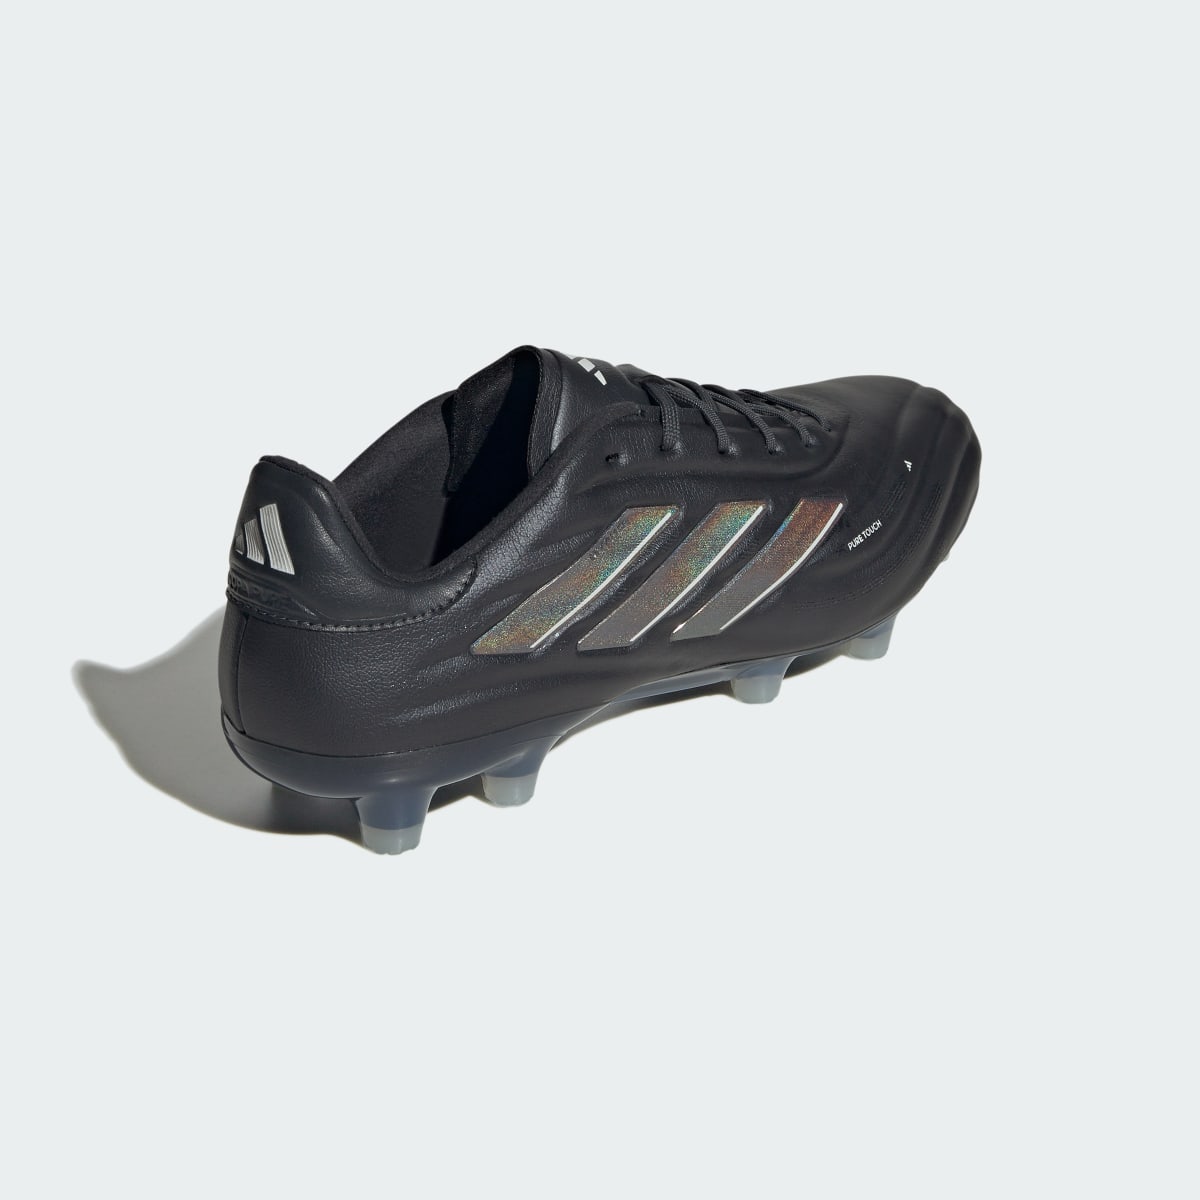 Adidas Copa Pure II Elite Firm Ground Boots. 6